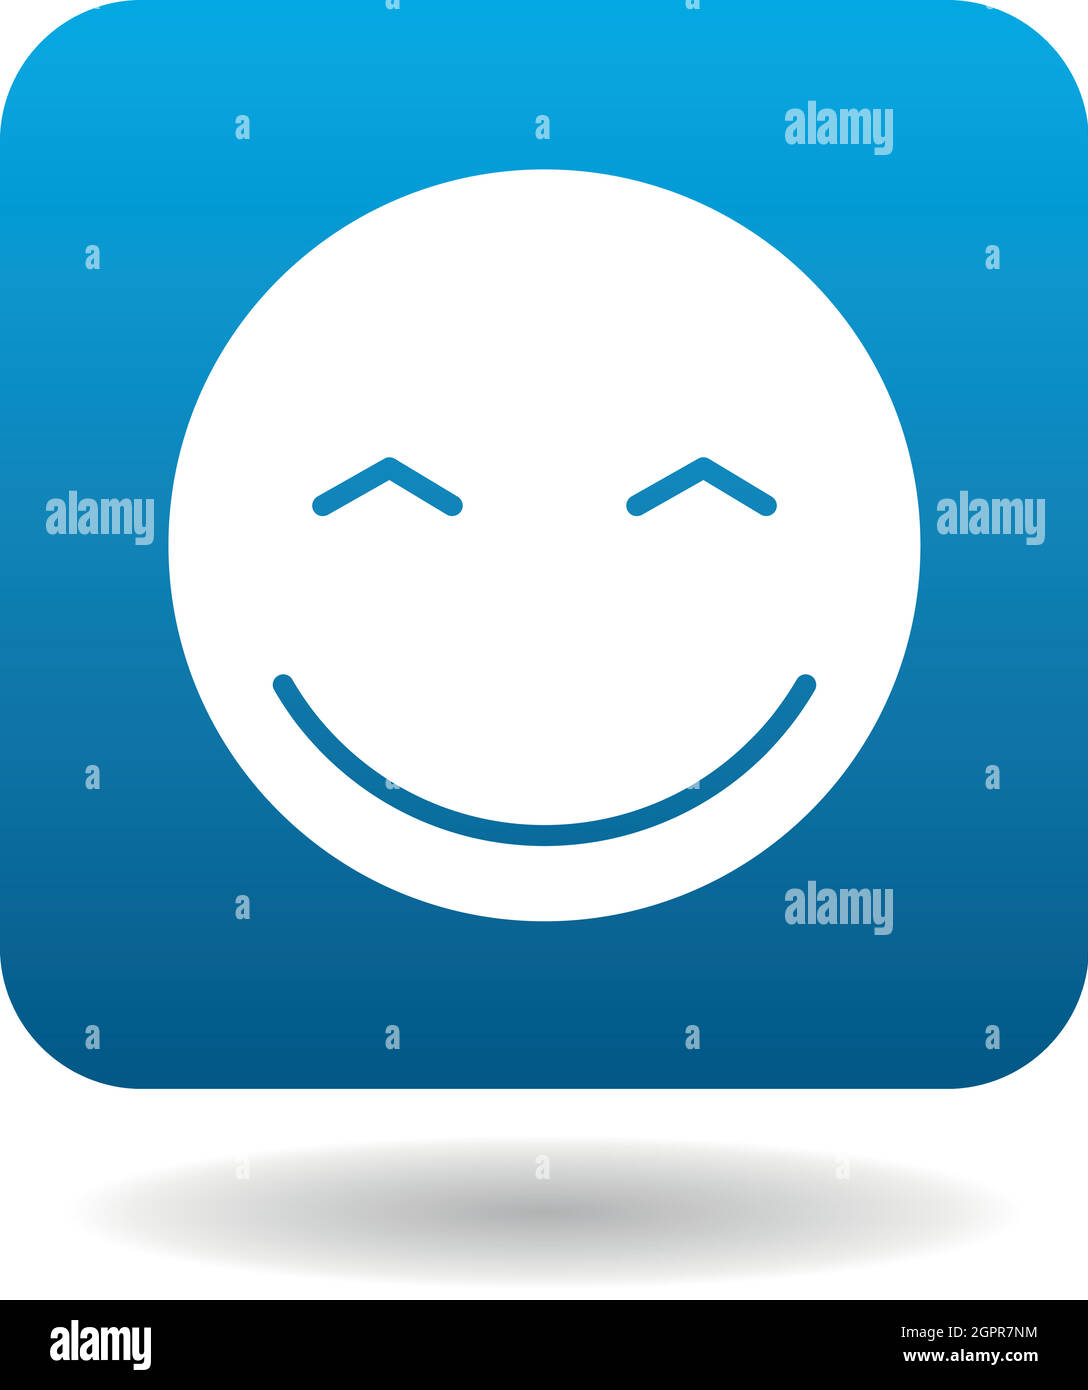 Smiling emoticon with smiling eyes icon Stock Vector